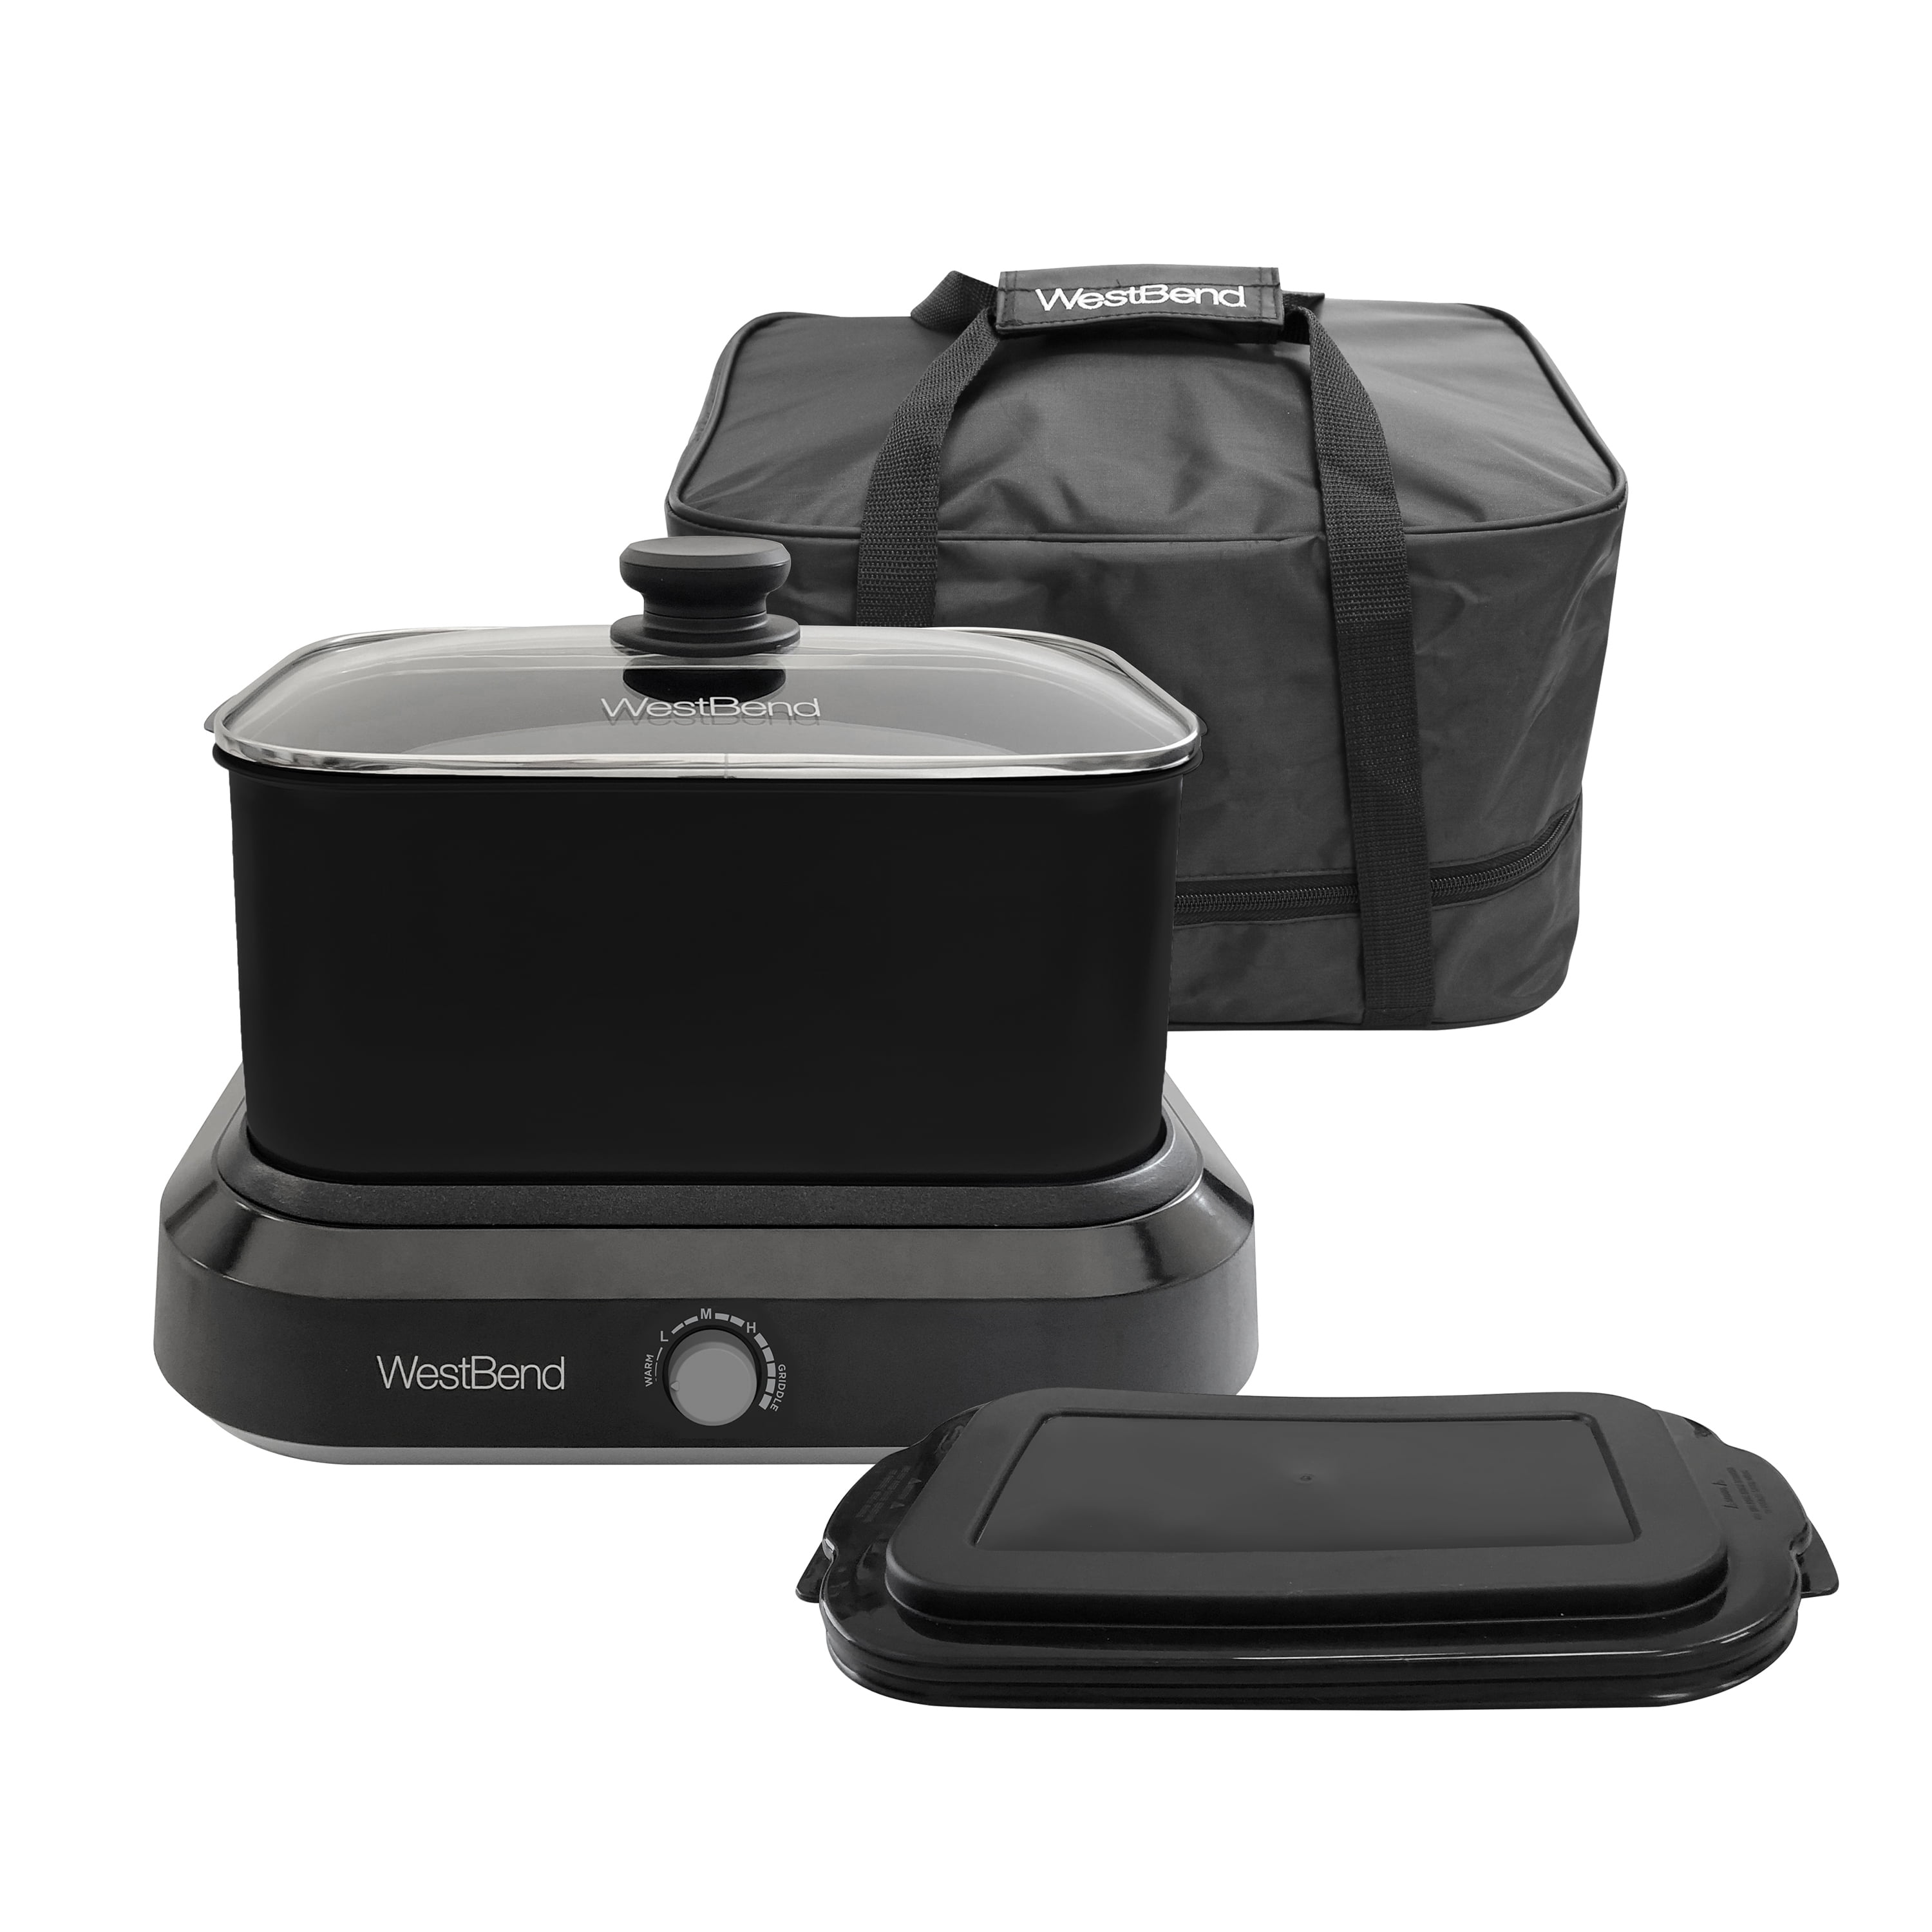 West Bend 84915R Versatility Slow Cooker with Insulated Tote and